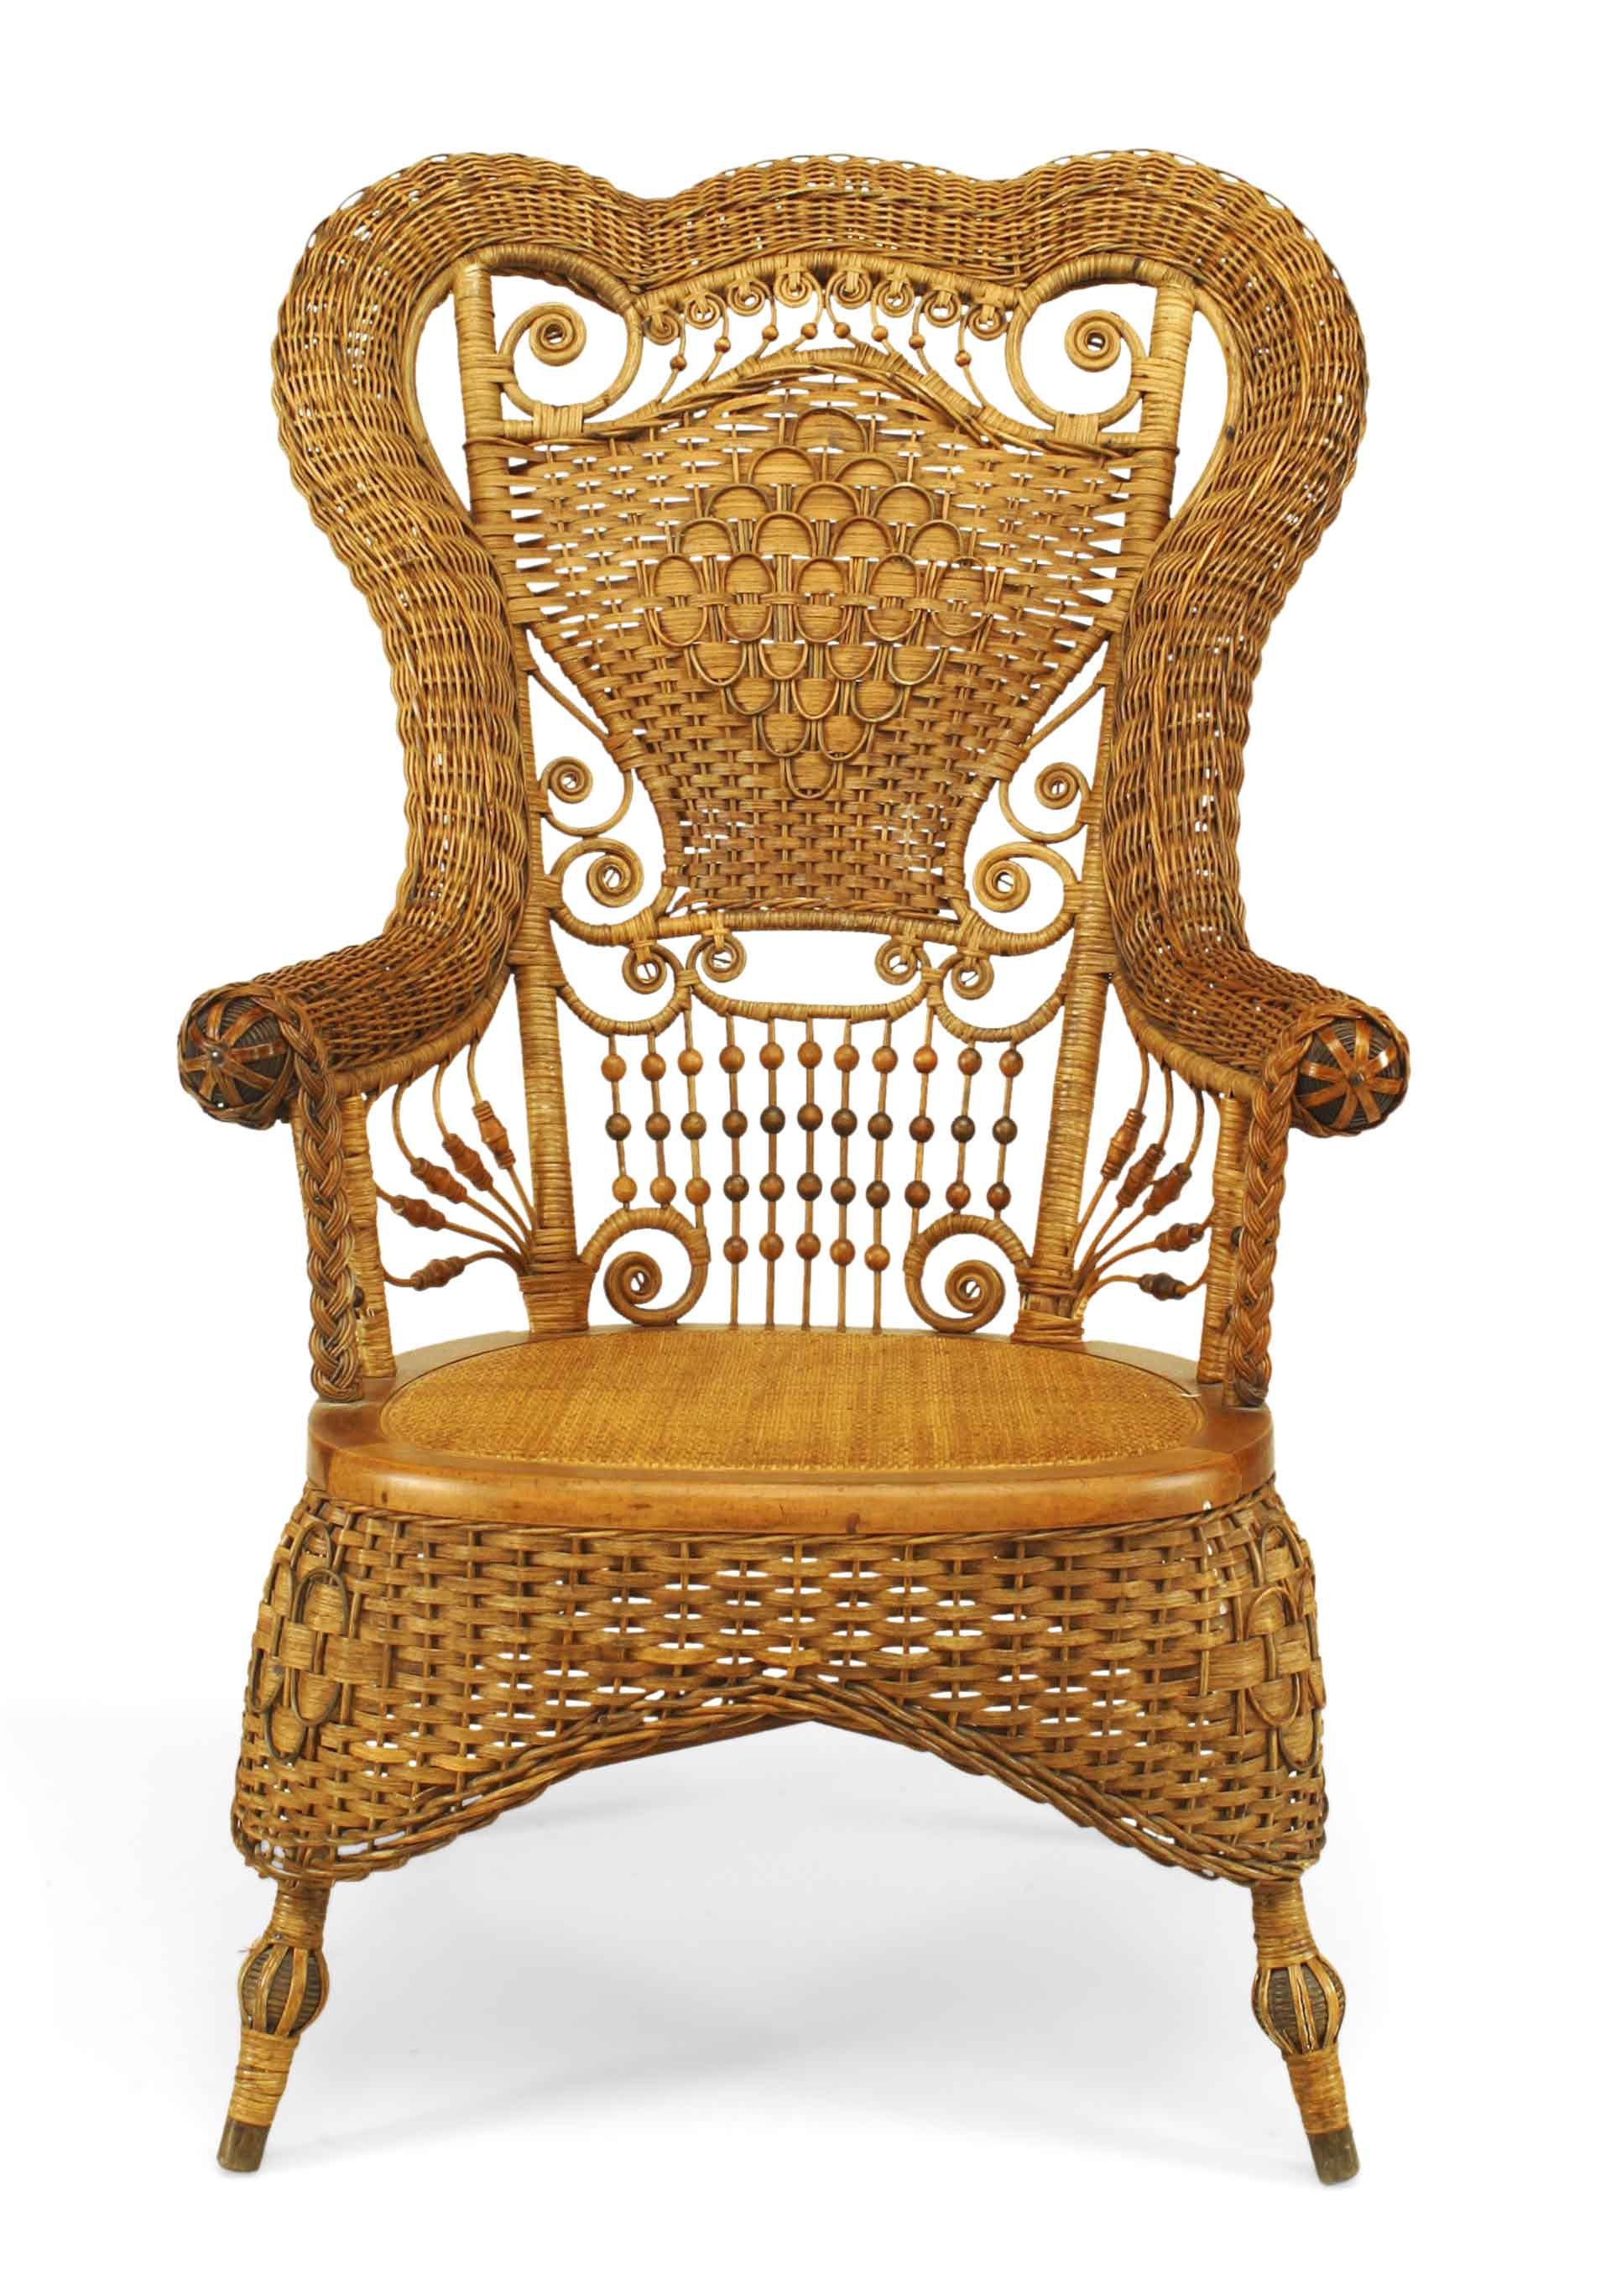 13 most iconic wicker chairs  historic wicker seating